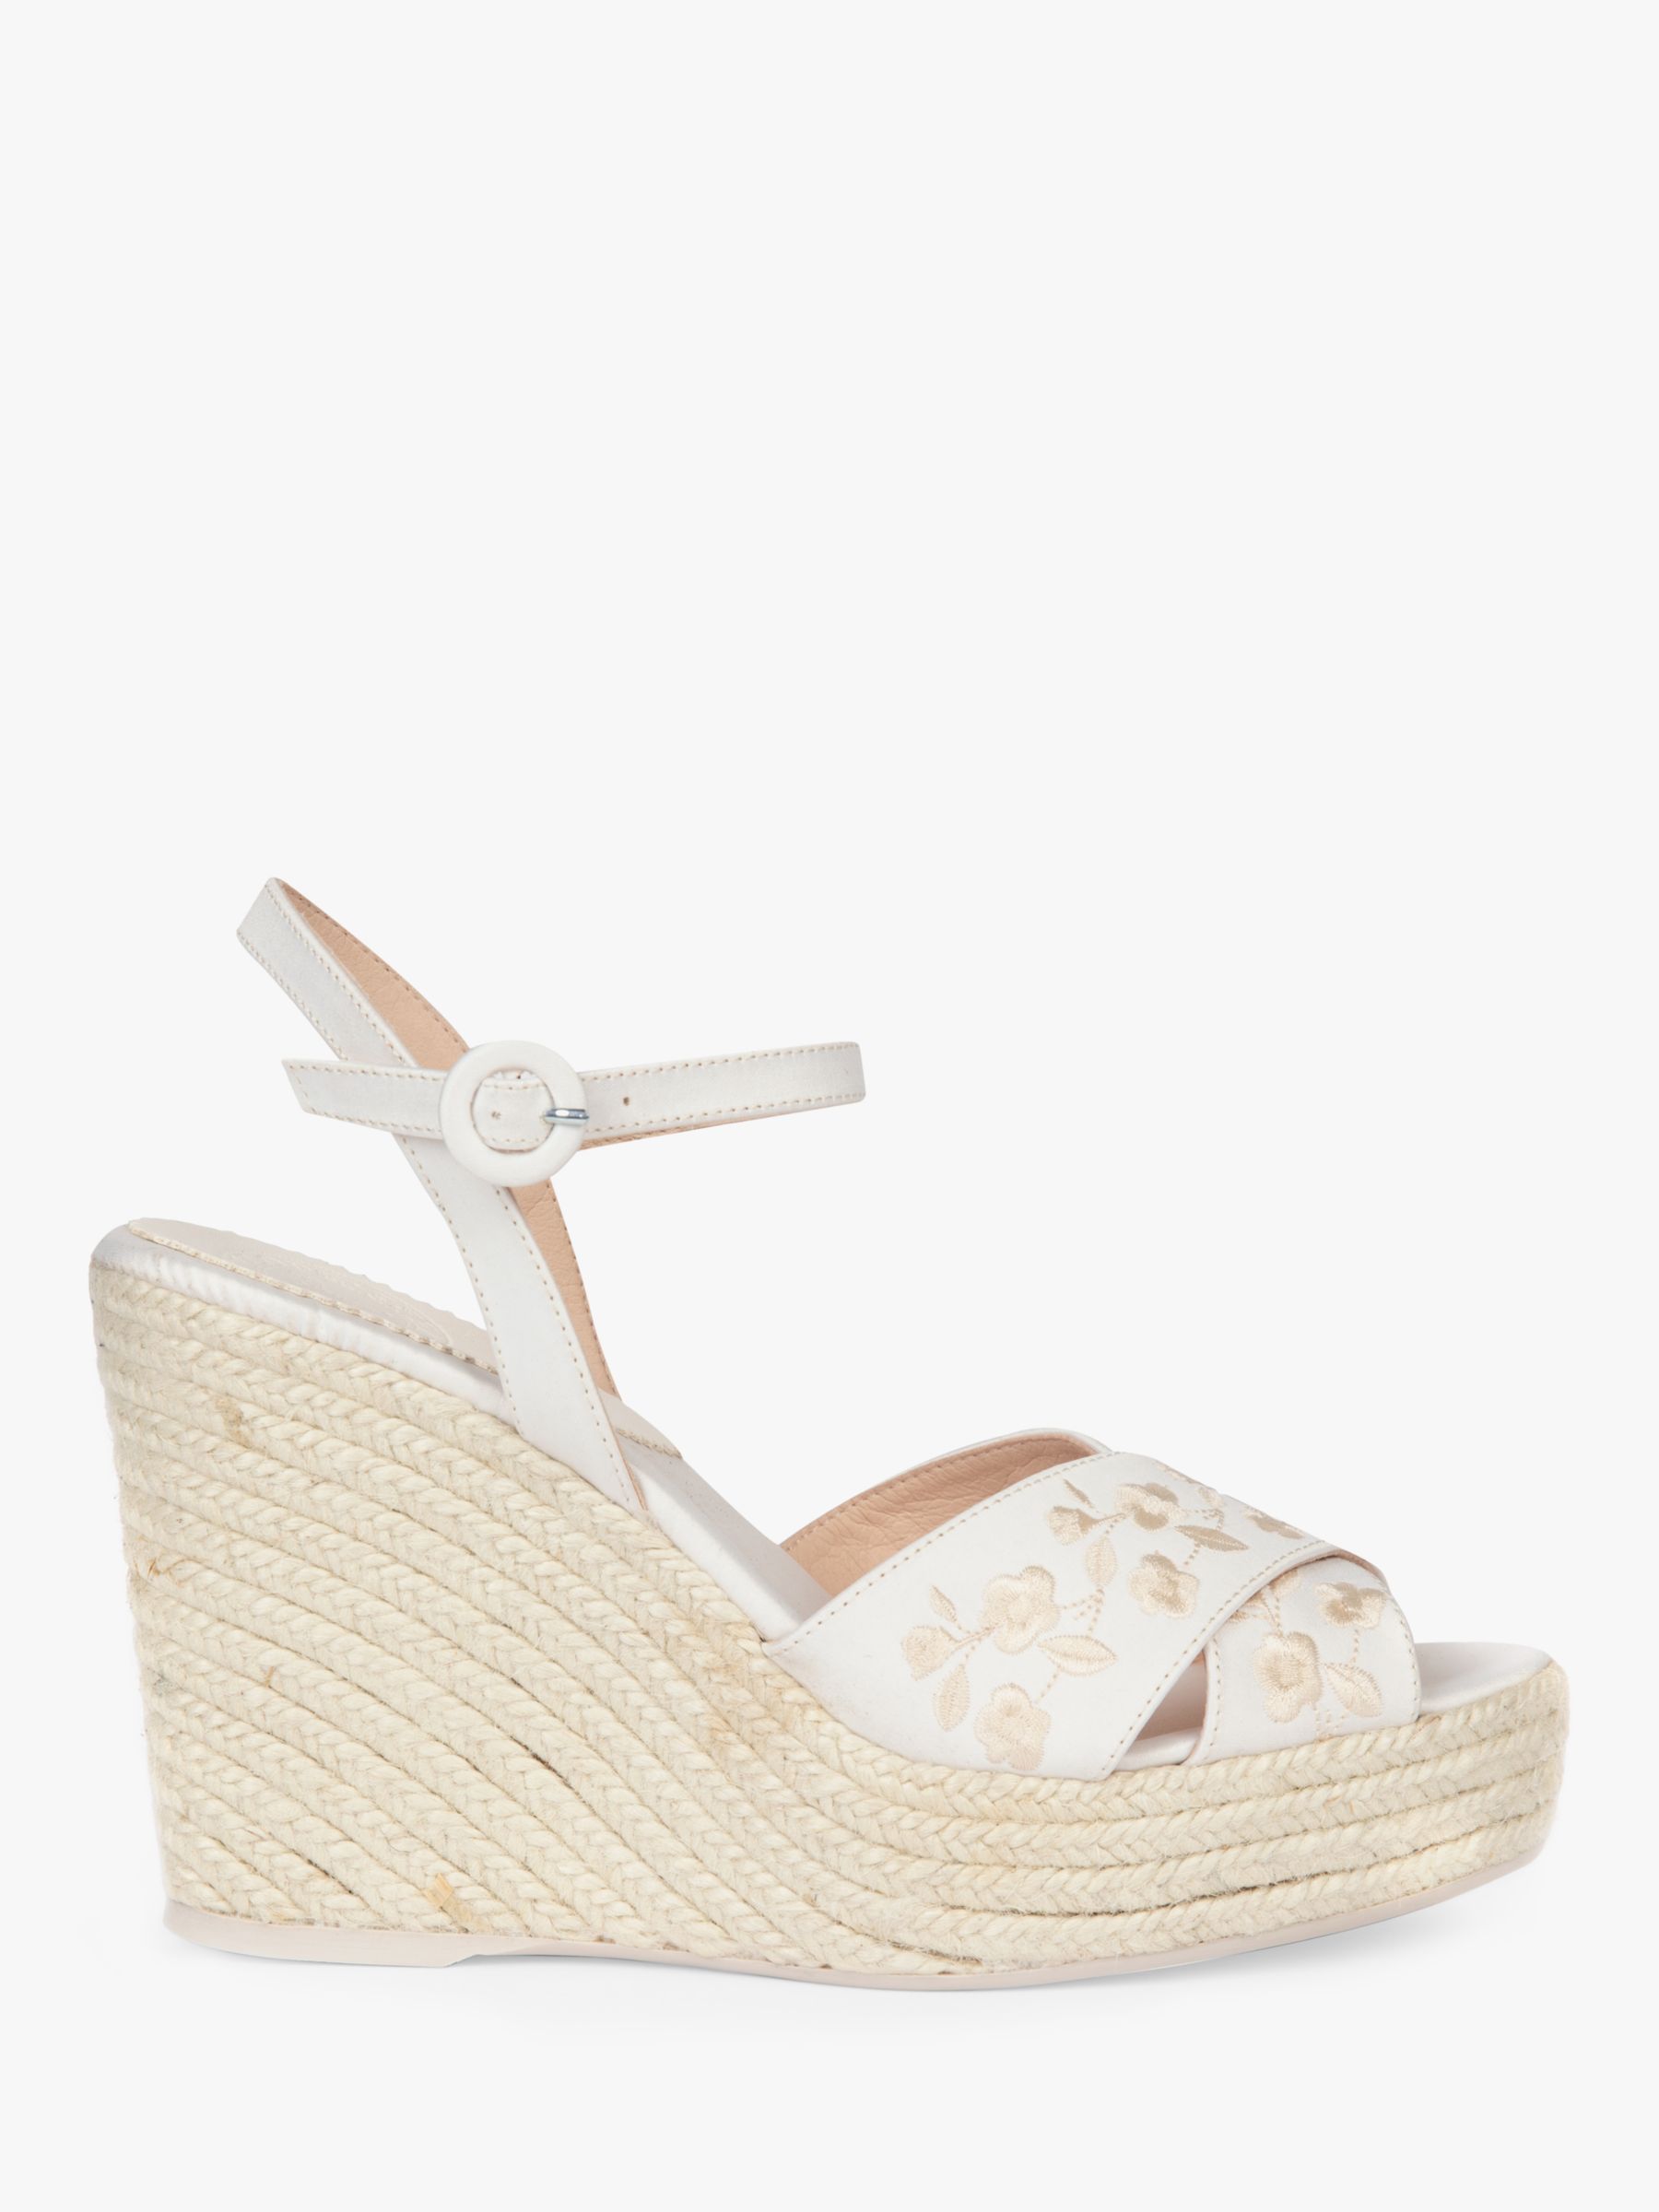 Penelope Chilvers Santorini Embroidered Wedge Sandals, Ivory at John ...